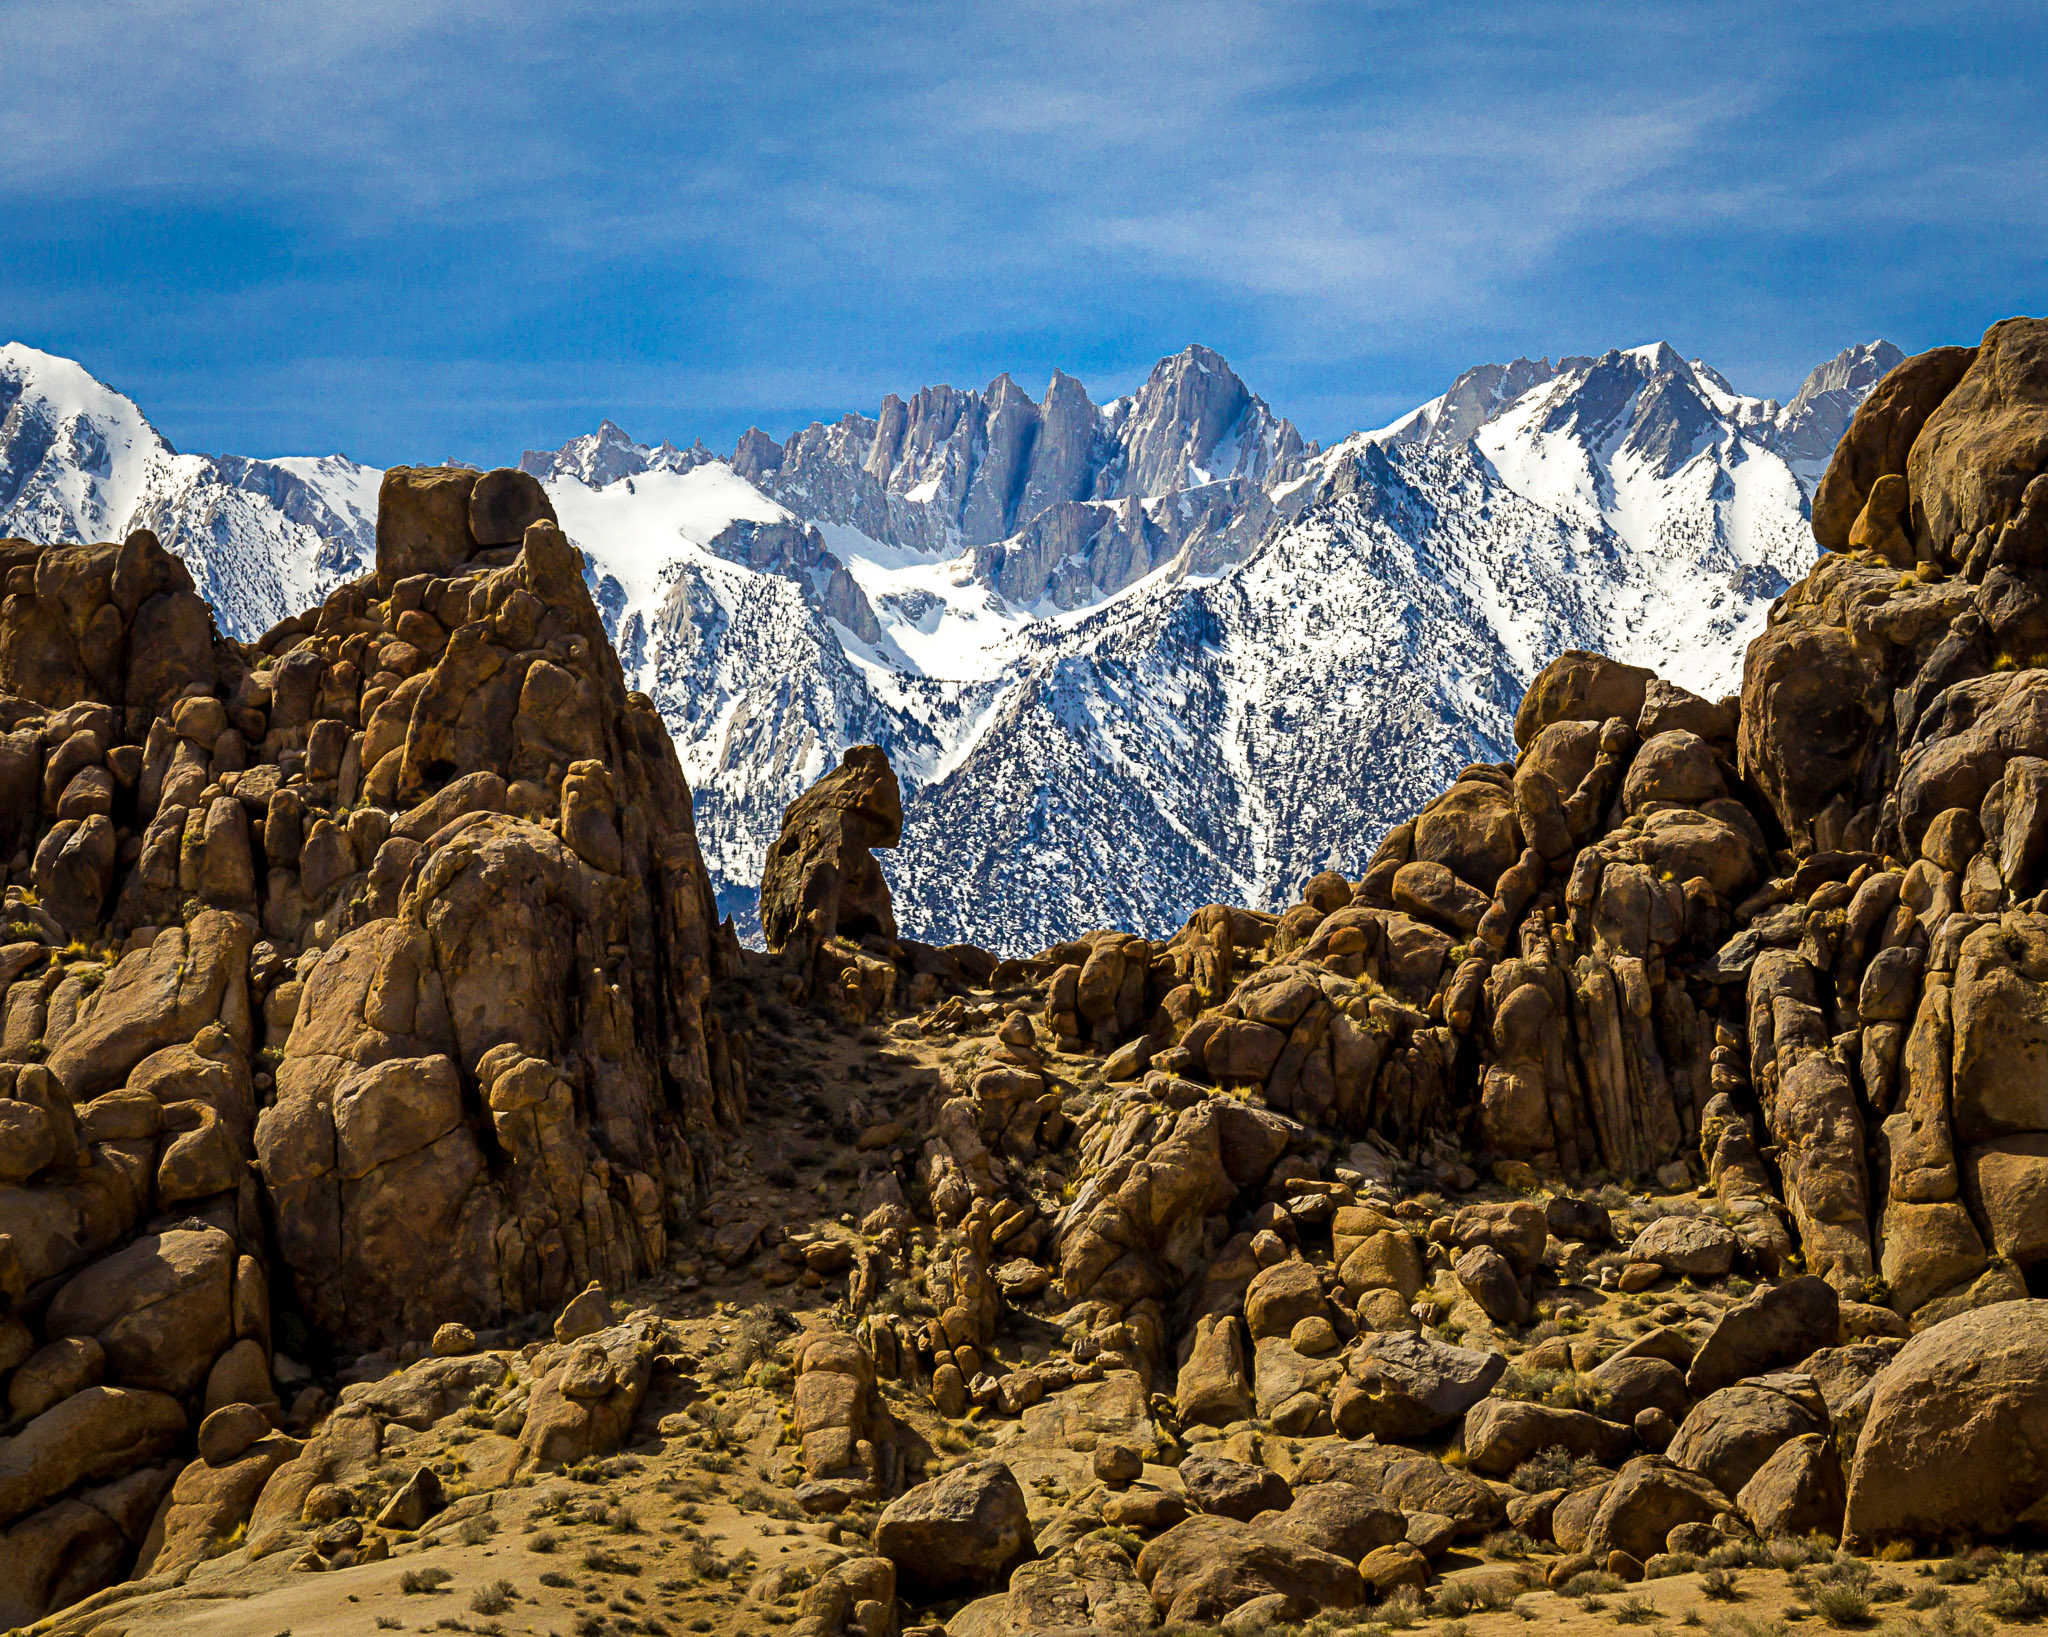 Mt. Whitney from Alabama Hills